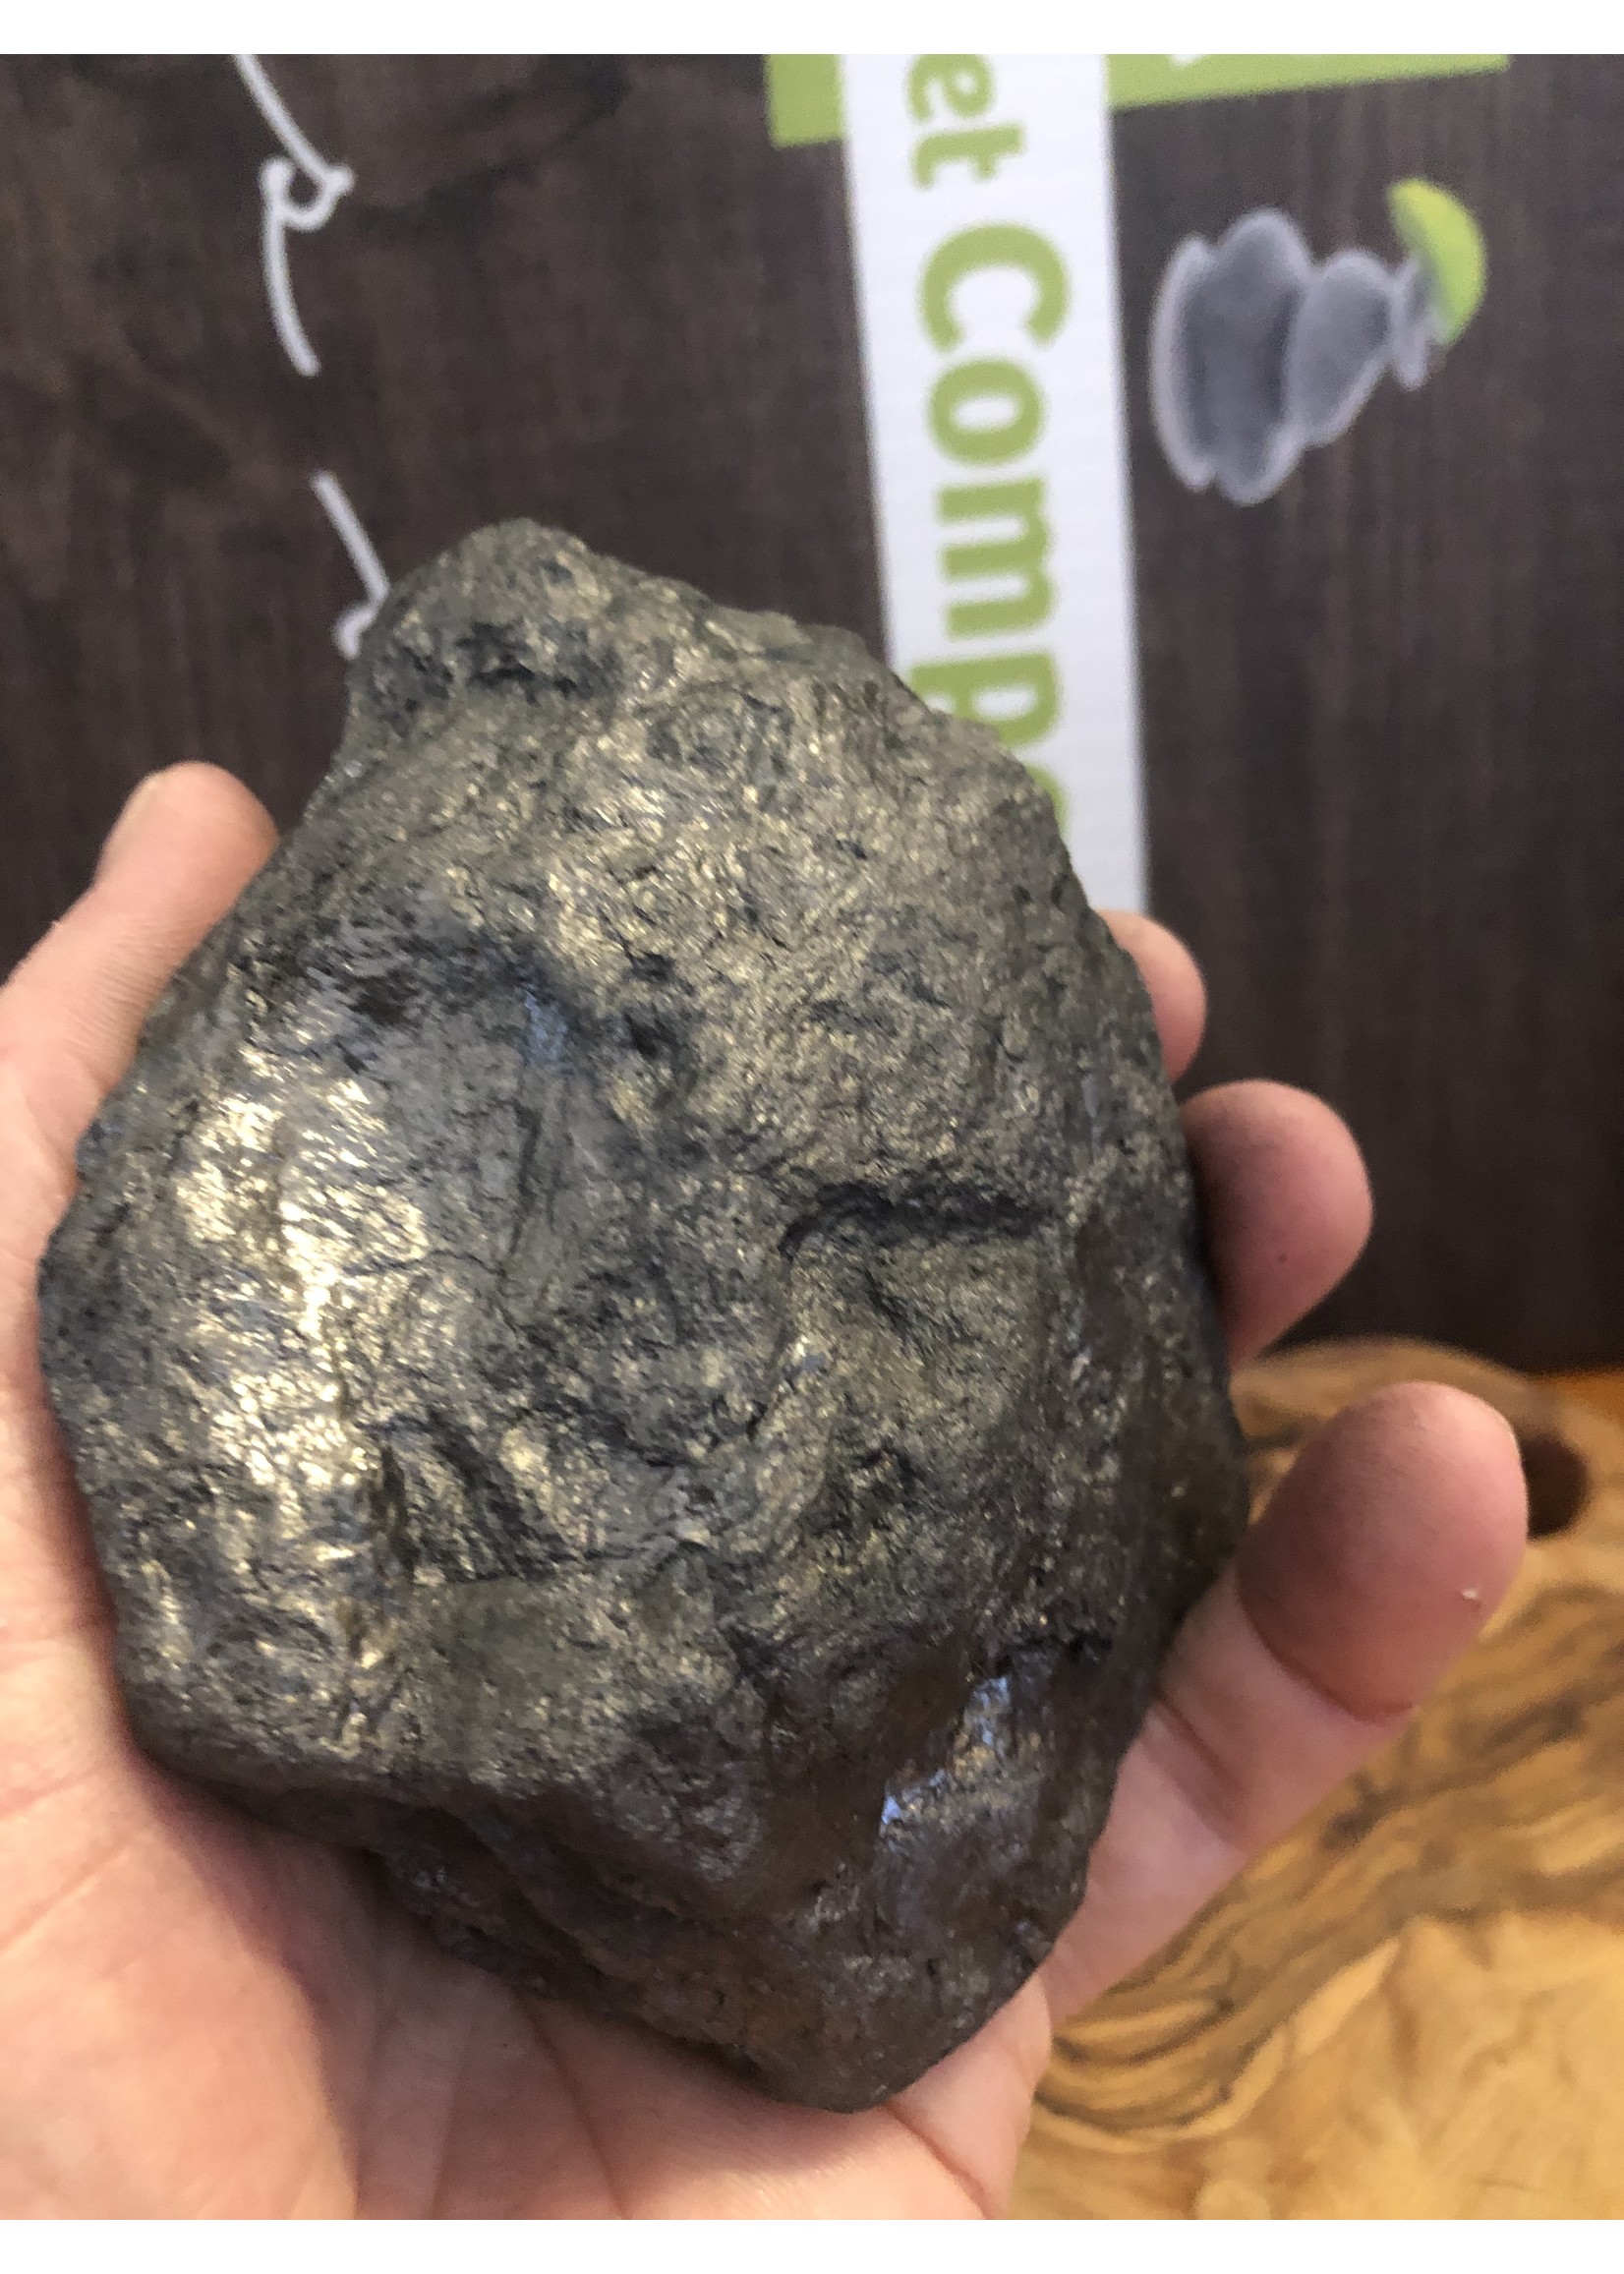 extra large natural shungite rock, has a unique and remarkable ability, neutralizes electromagnetic disturbances harmful to health